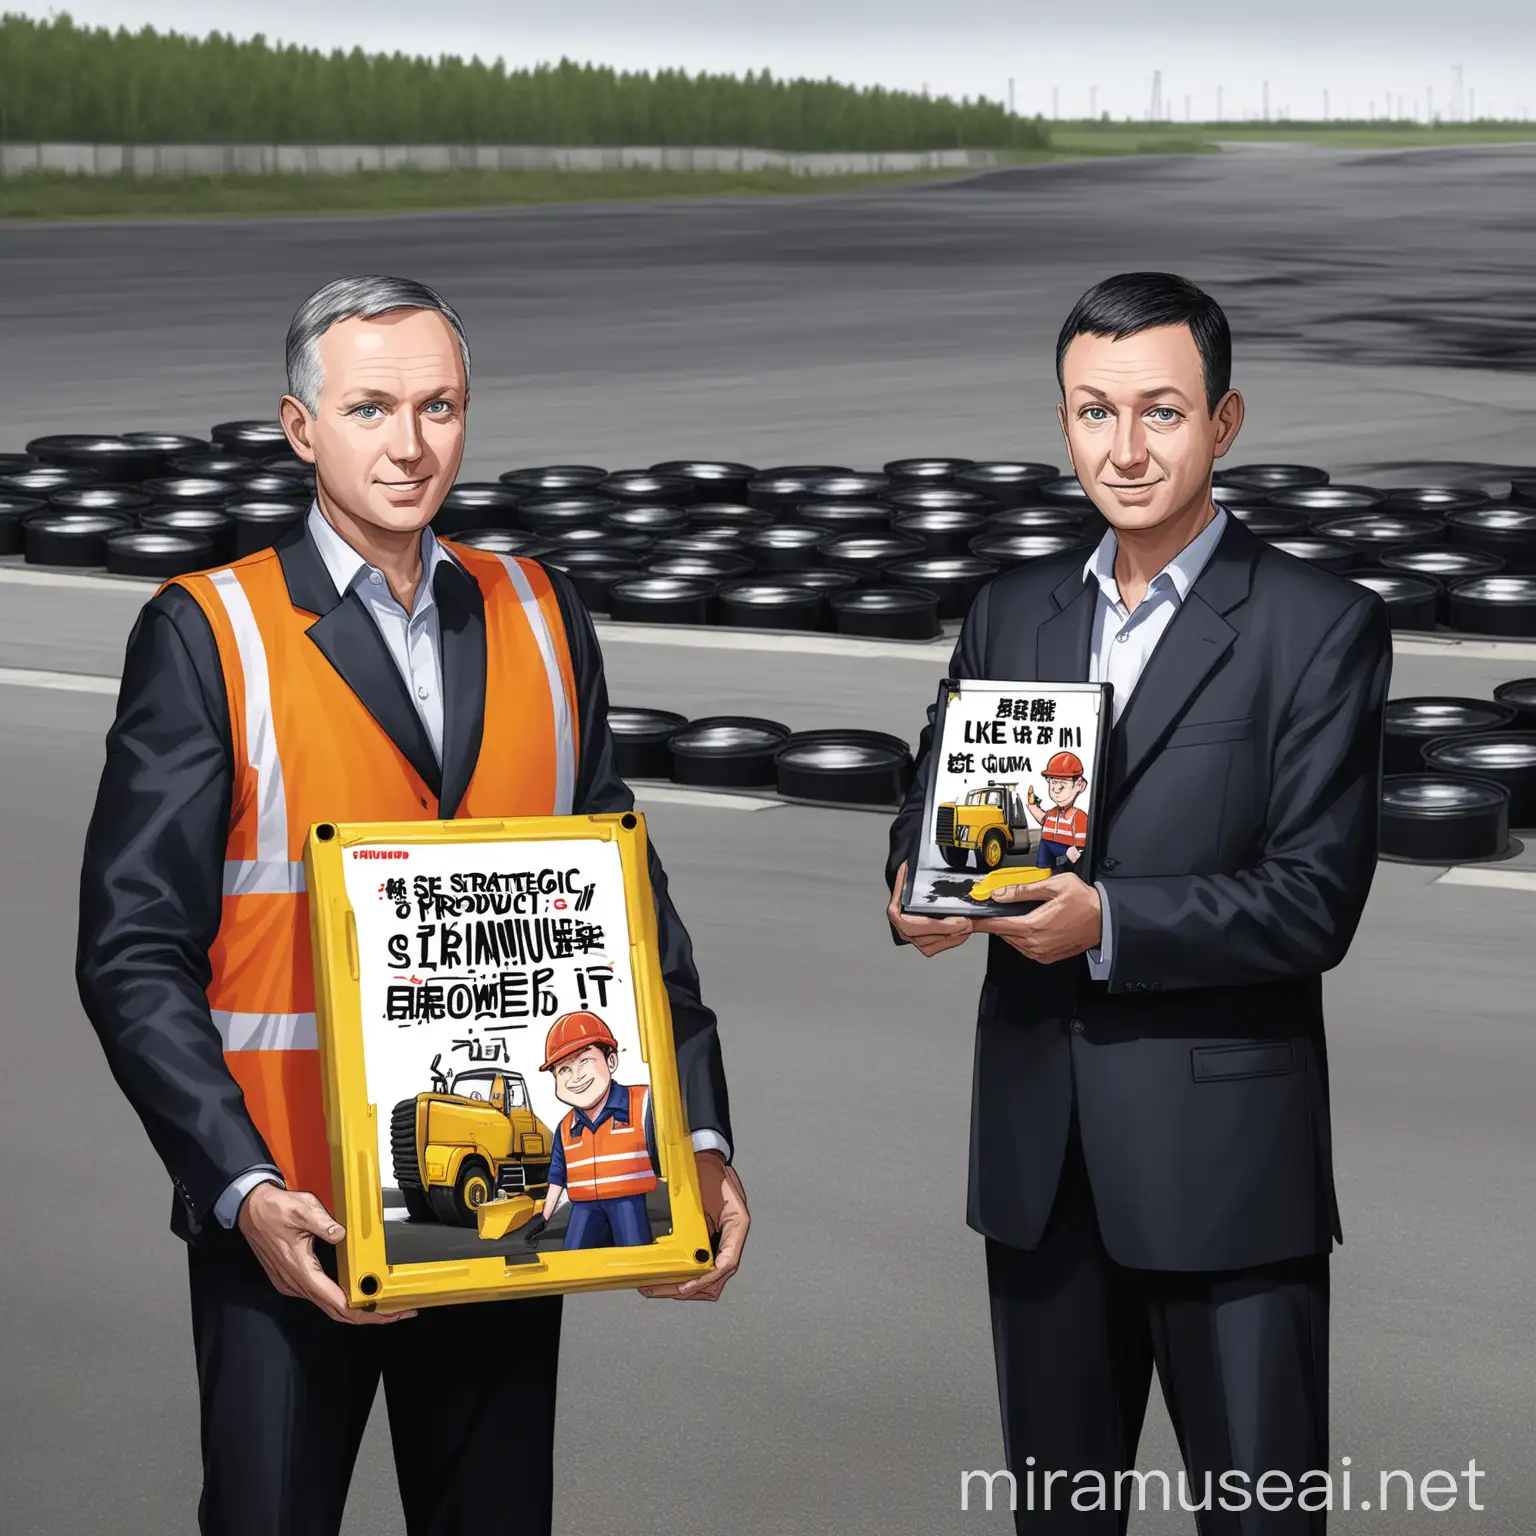 Two men with a very nice cartoon image are promoting a strategic product like bitumen to sell it to a third country.